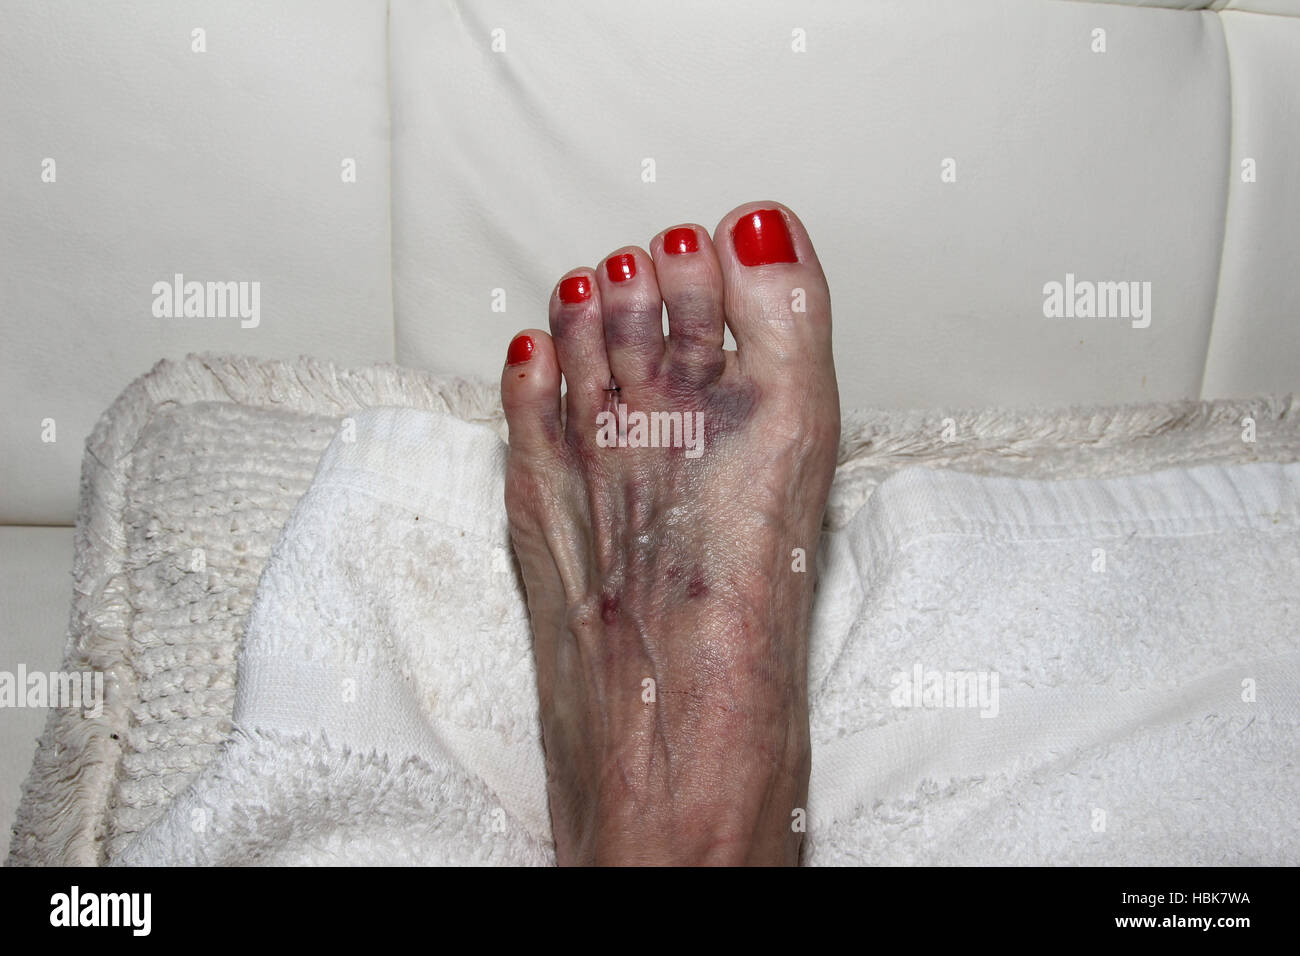 Foot after Morton’s neuroma surgery Stock Photo